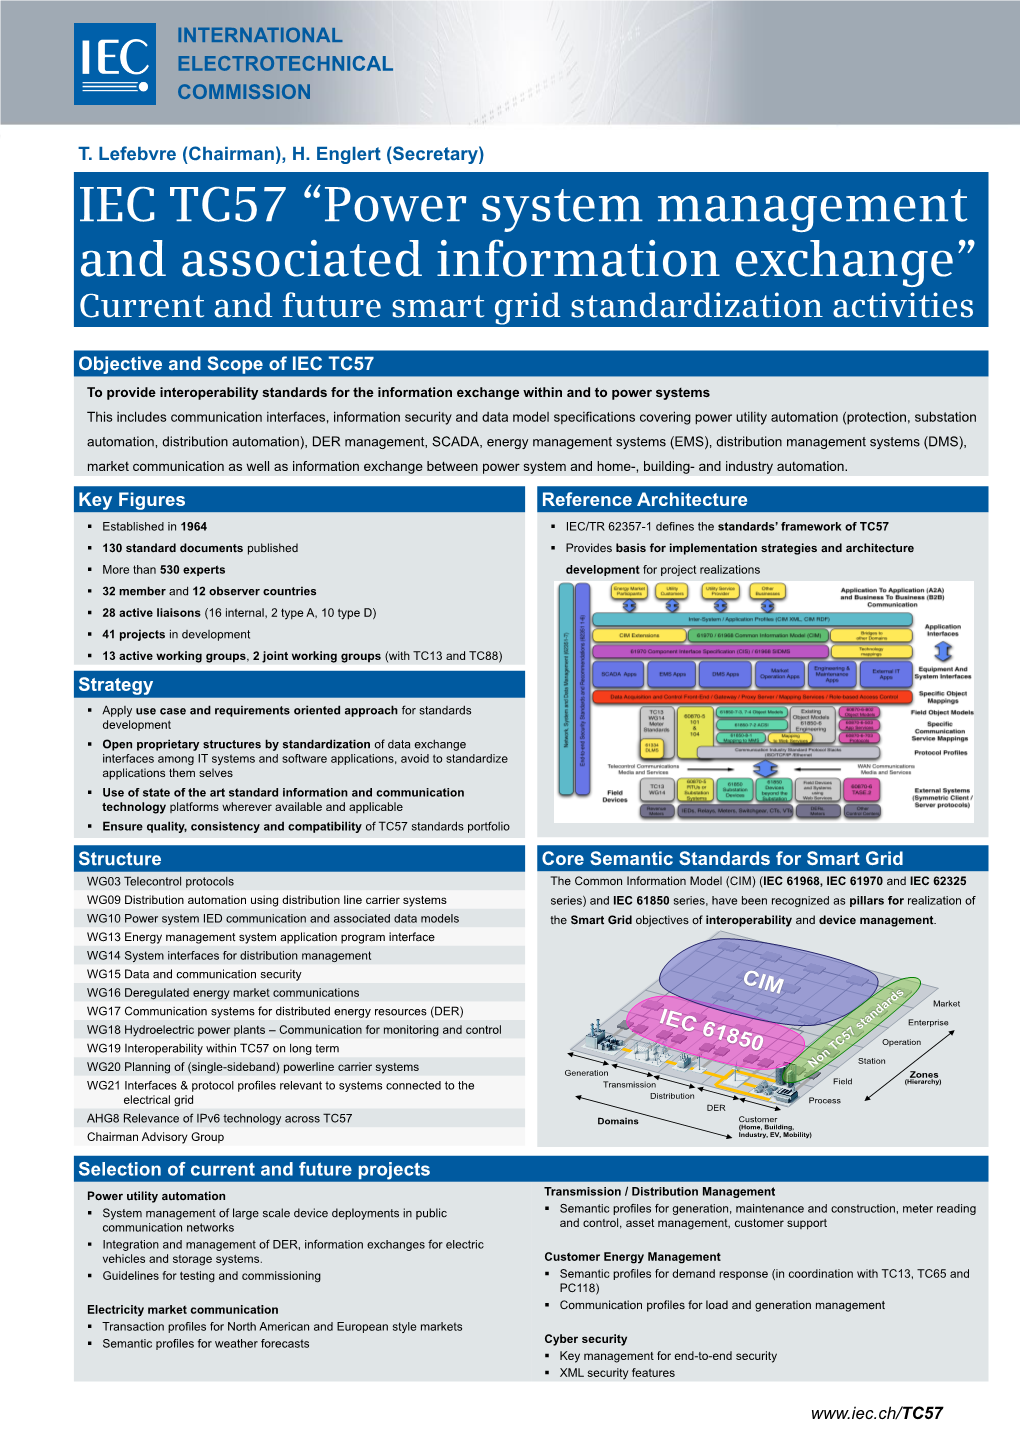 IEC TC57 “Power System Management and Associated Information Exchange” Current and Future Smart Grid Standardization Activities